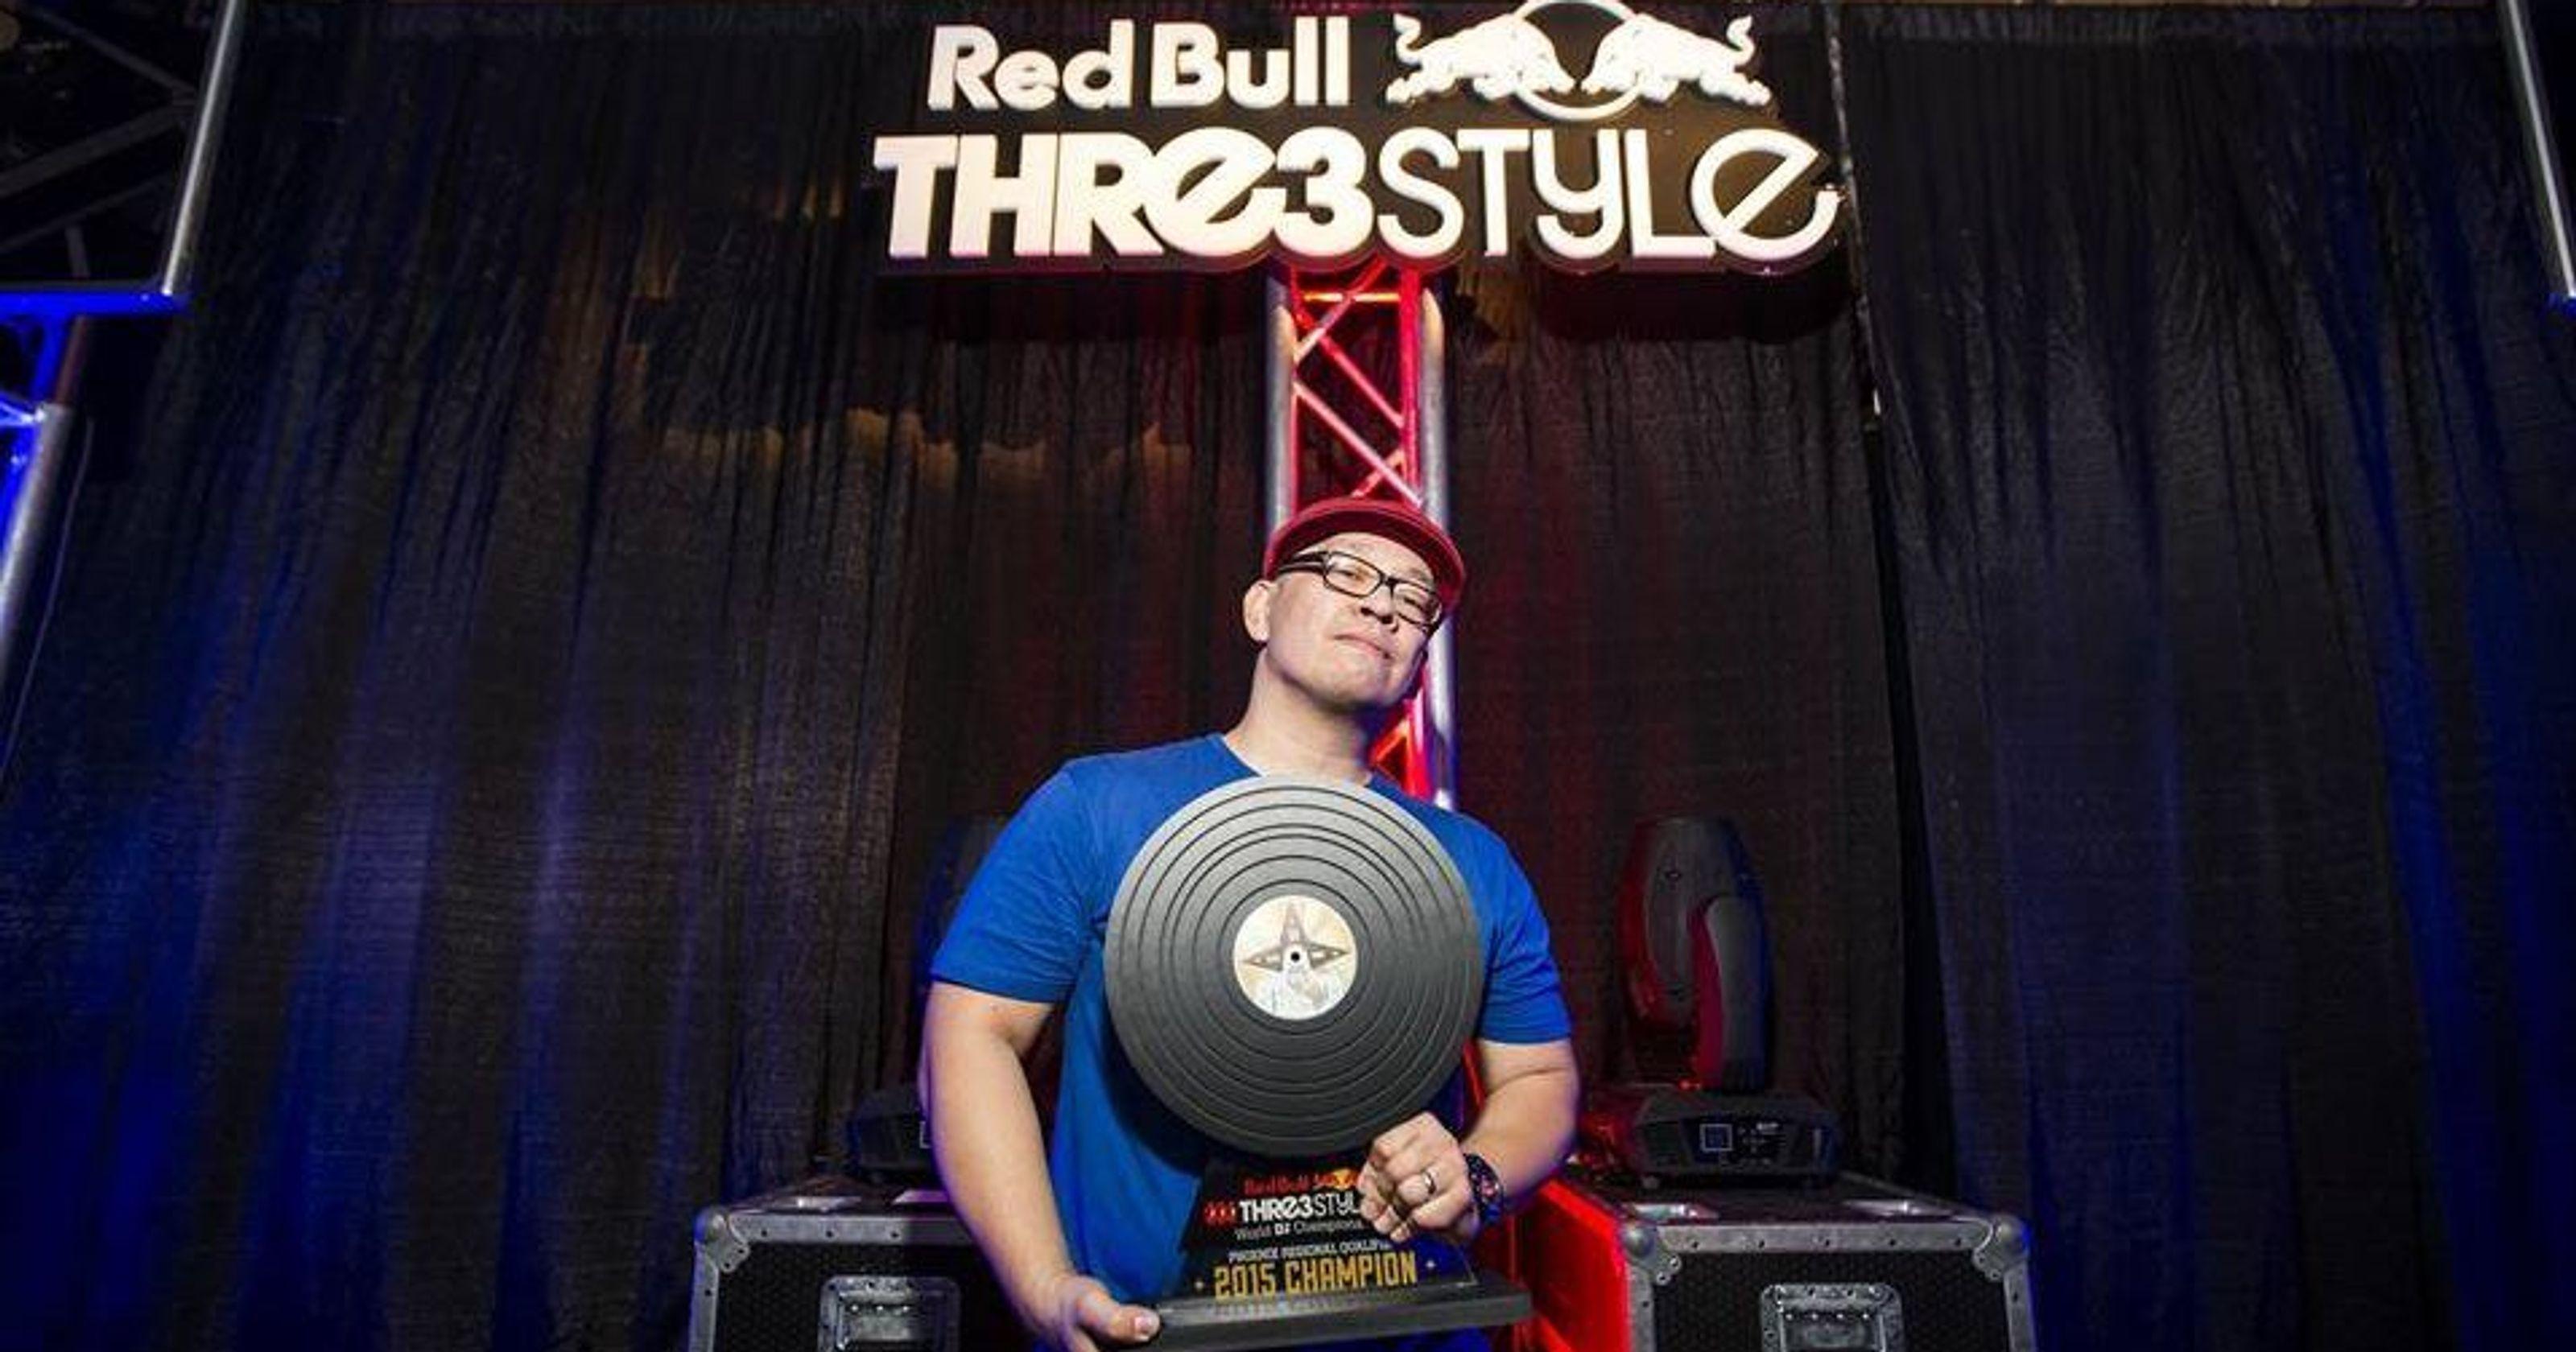 Phoenix Mixed with Red Bull Logo - Red Bull Thre3style DJ Championship In Phoenix, 4 2 4